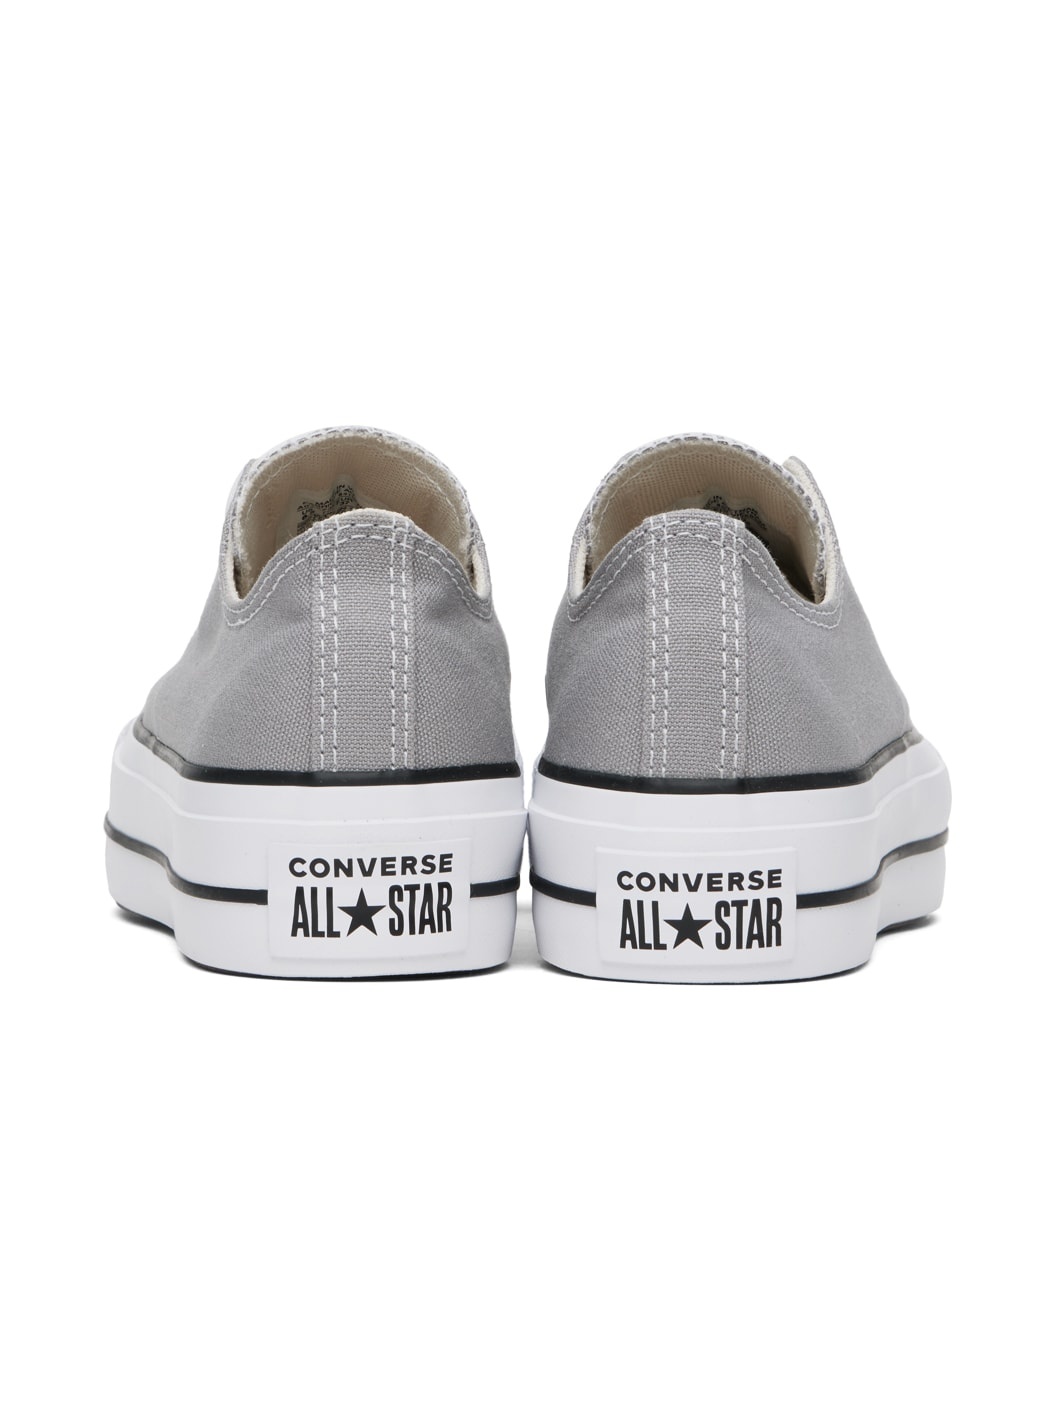 Gray Chuck Taylor All Star Low Top Sneakers - 2